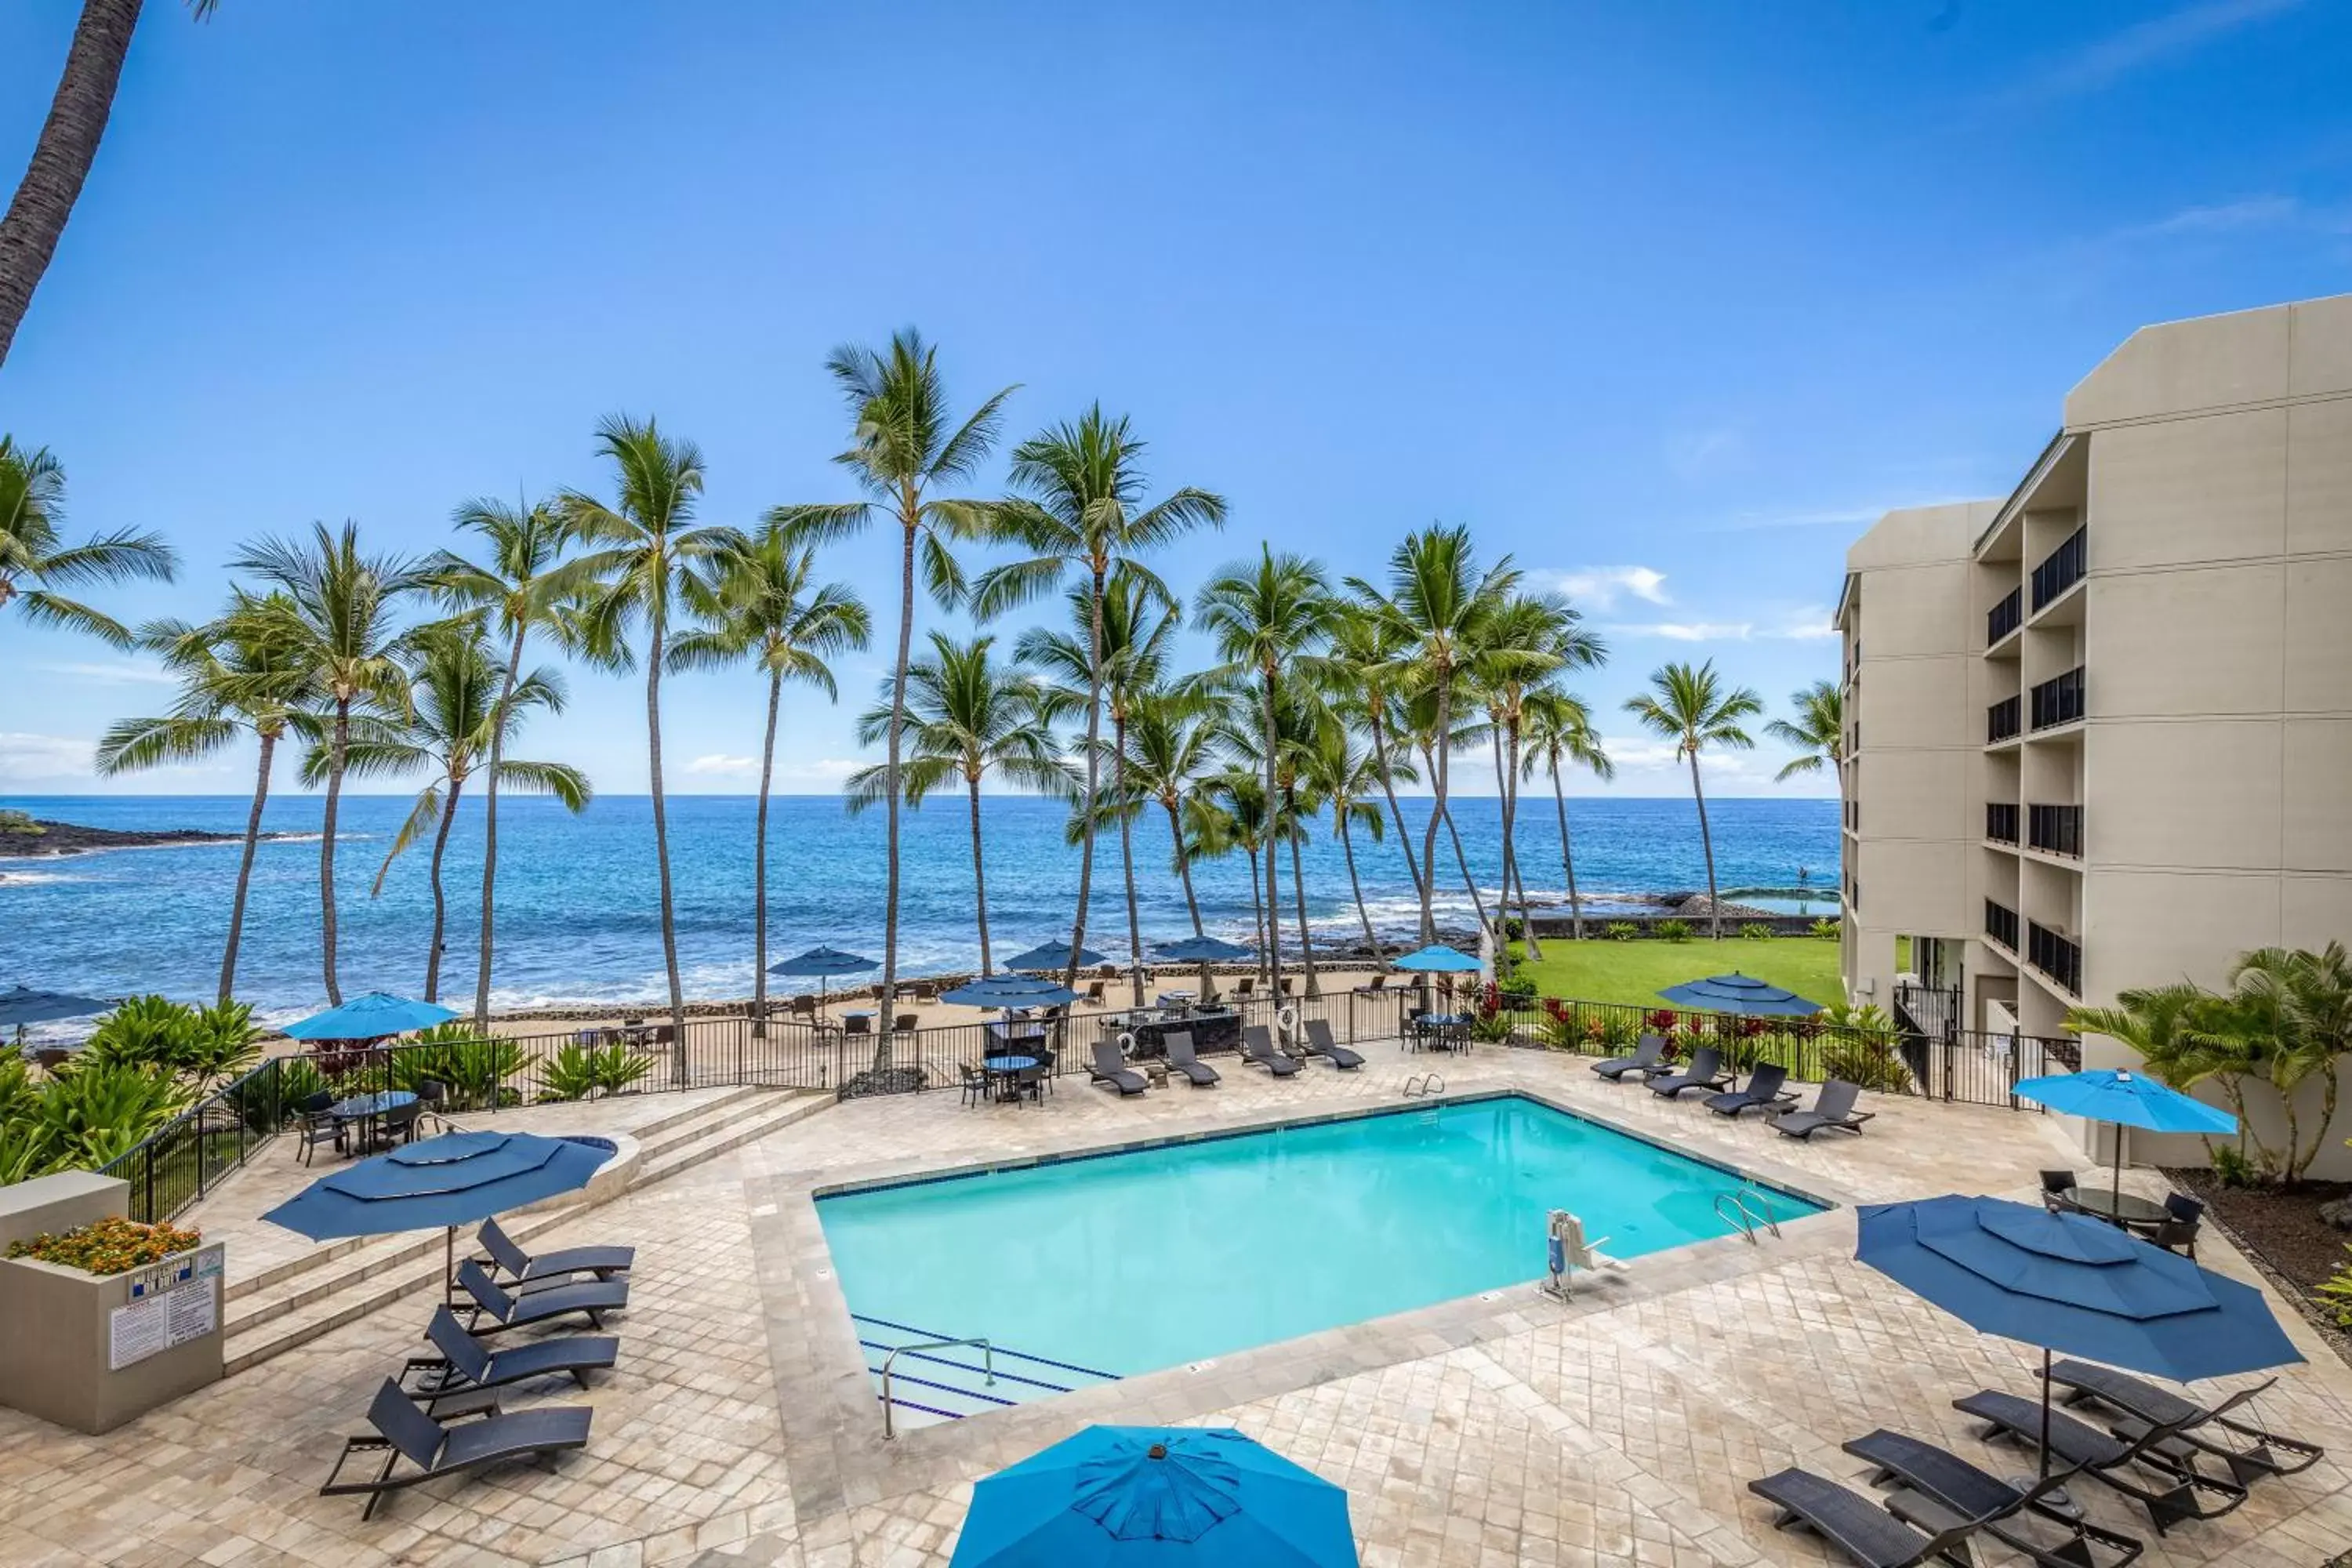 Property building, Pool View in Aston Kona By The Sea